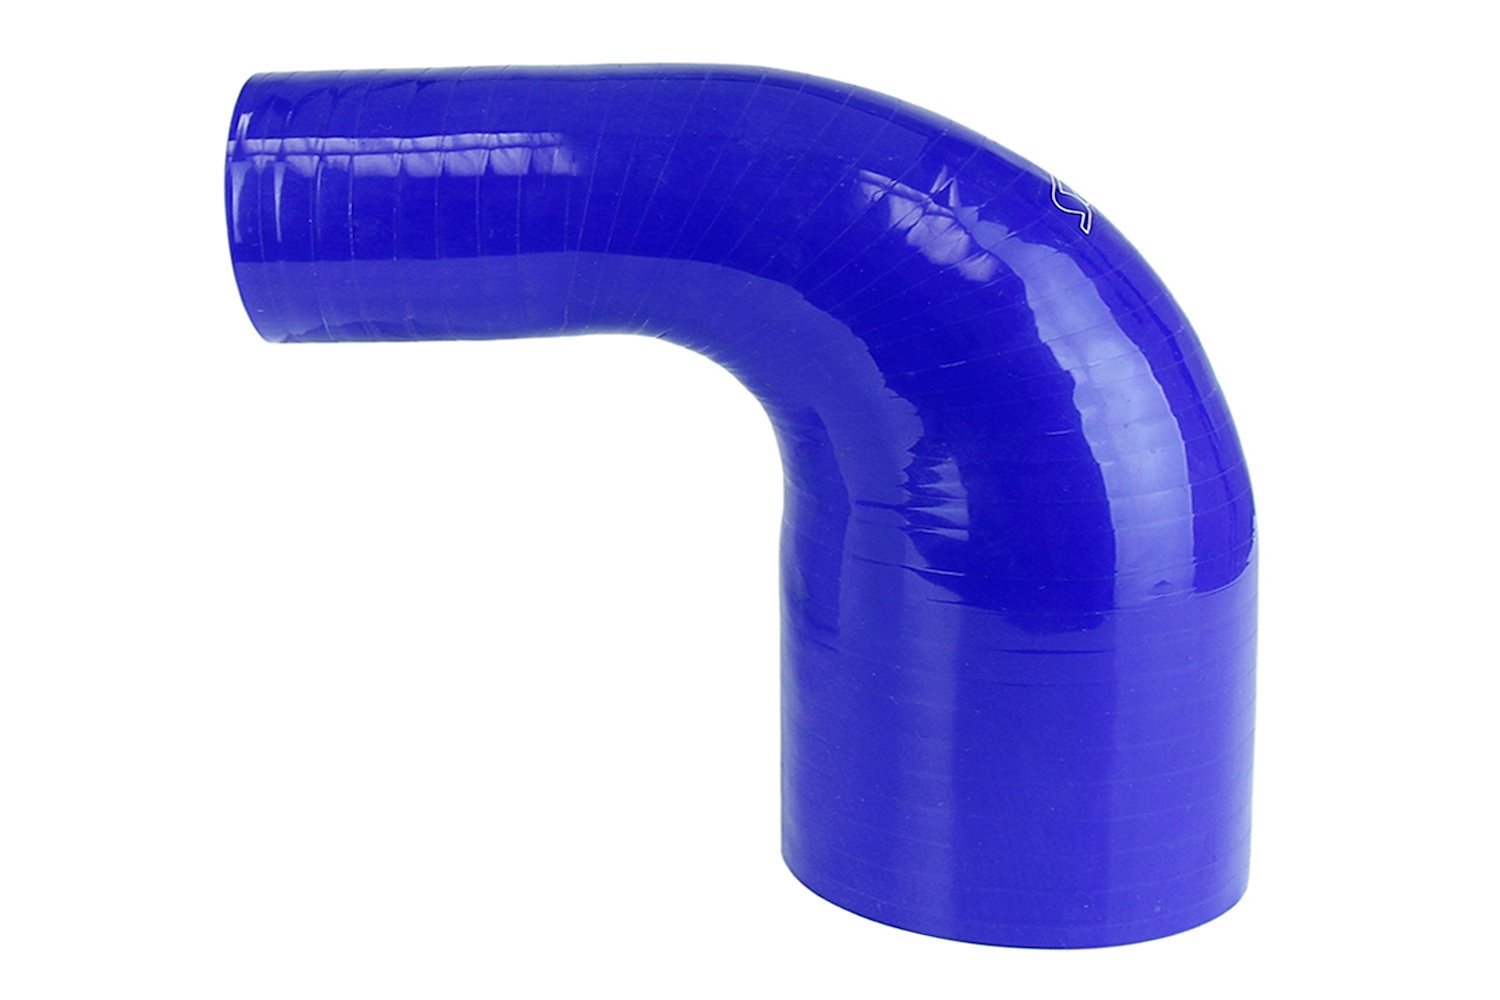 HTSER90-275-350-BLUE Silicone 90-Degree Elbow Hose, High-Temp 4-Ply Reinforced, 2-3/4 in. - 3-1/2 in. ID, Blue